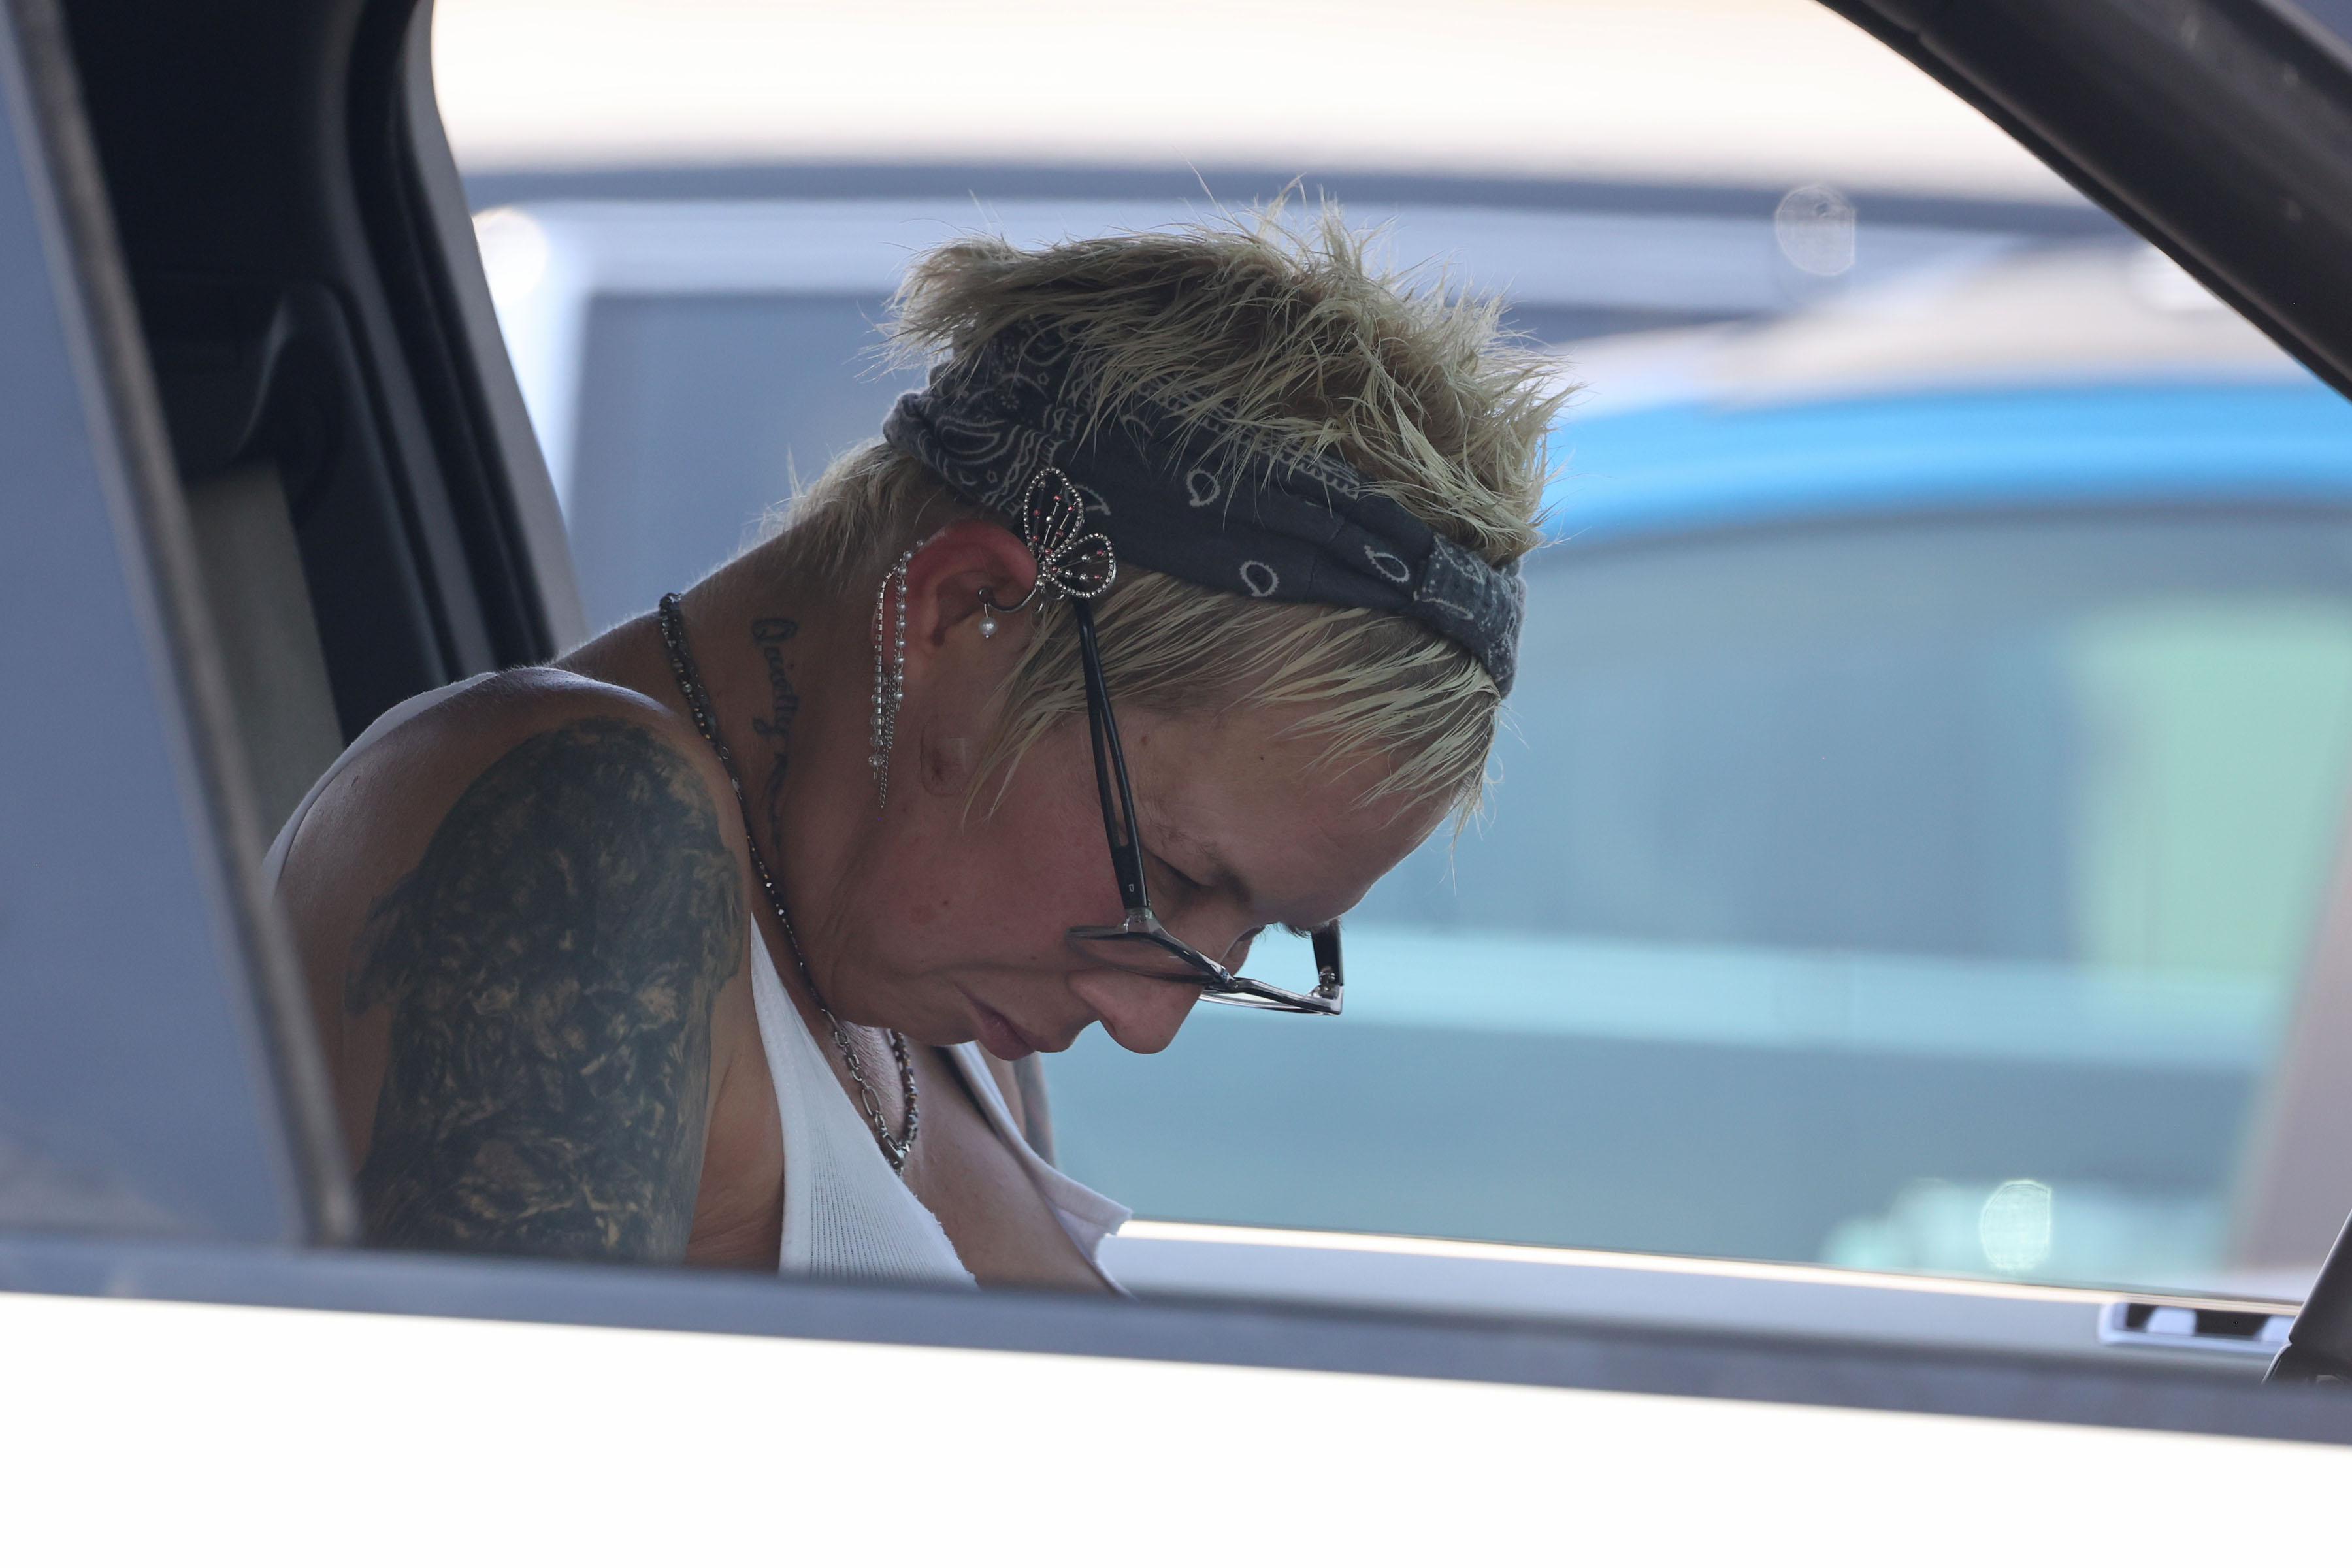 Kim Mathers fell asleep in her car with her front windows wound down